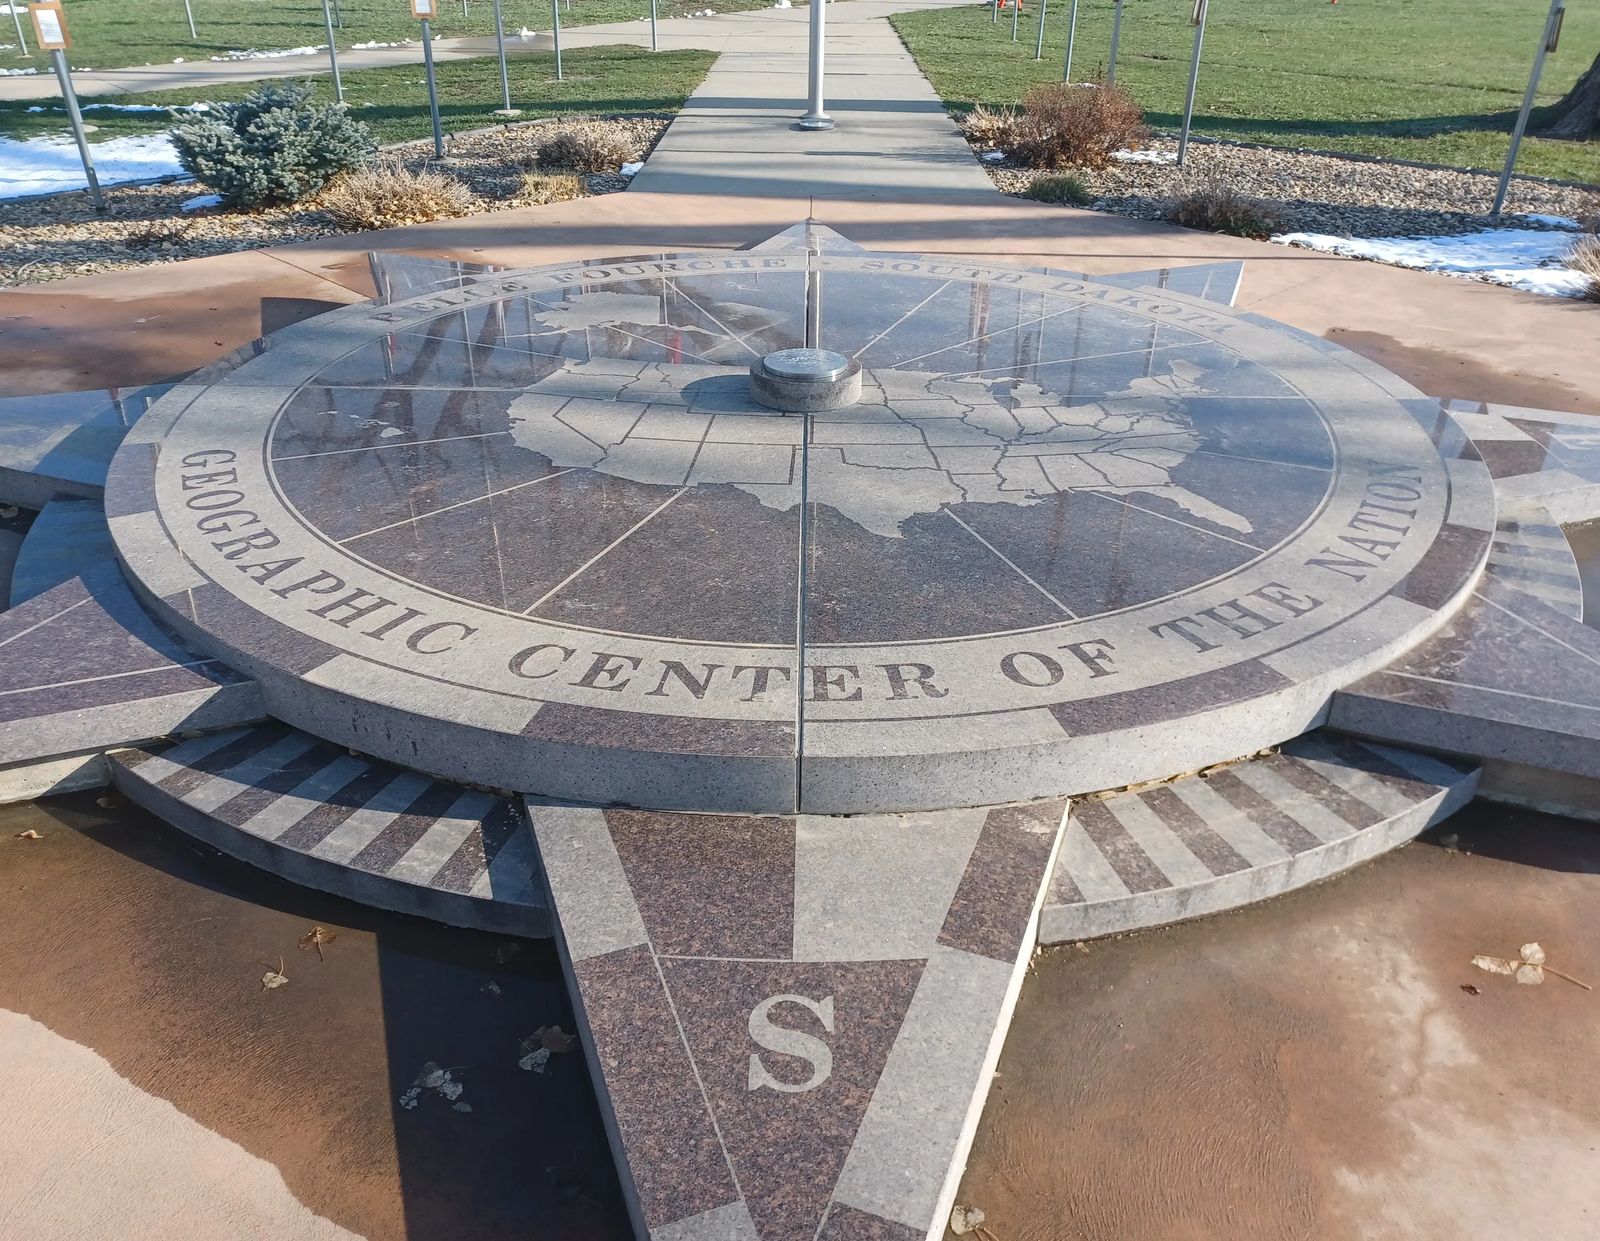 Photo of the Geographic Center of the Nation monument in Belle Fourche South Dakota